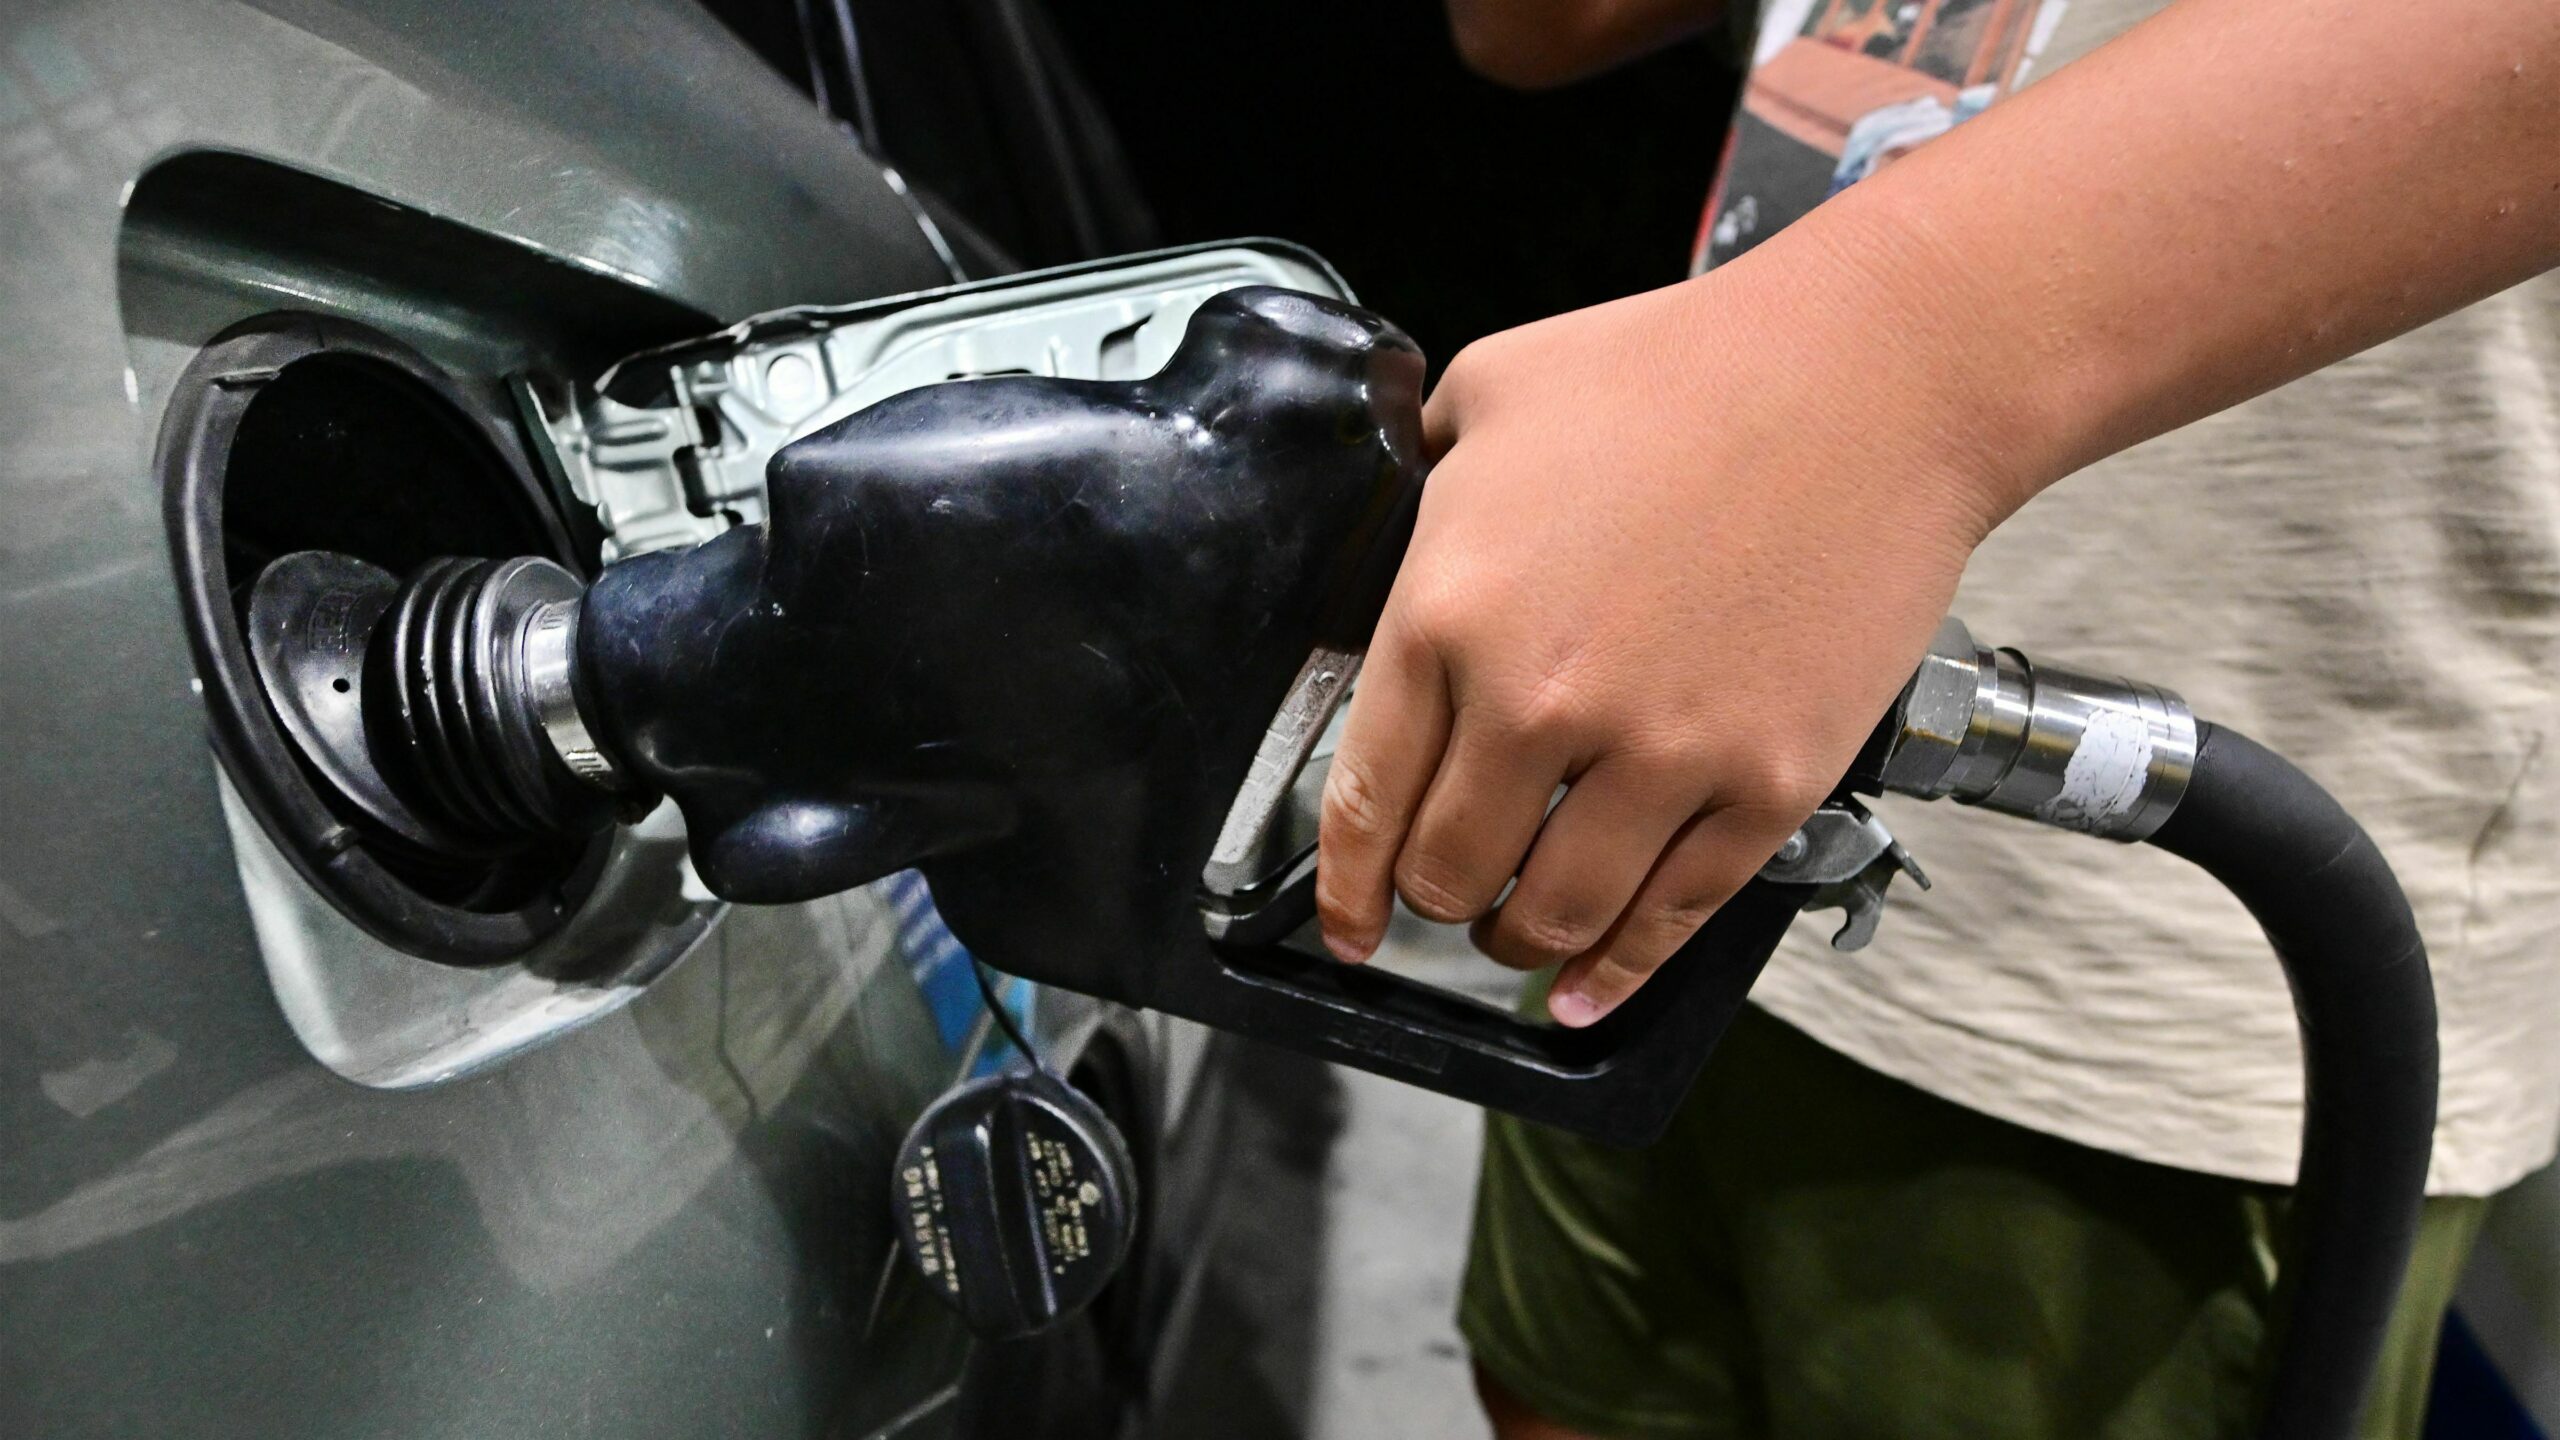 Inflation continues to moderate thanks to a big drop in gas prices